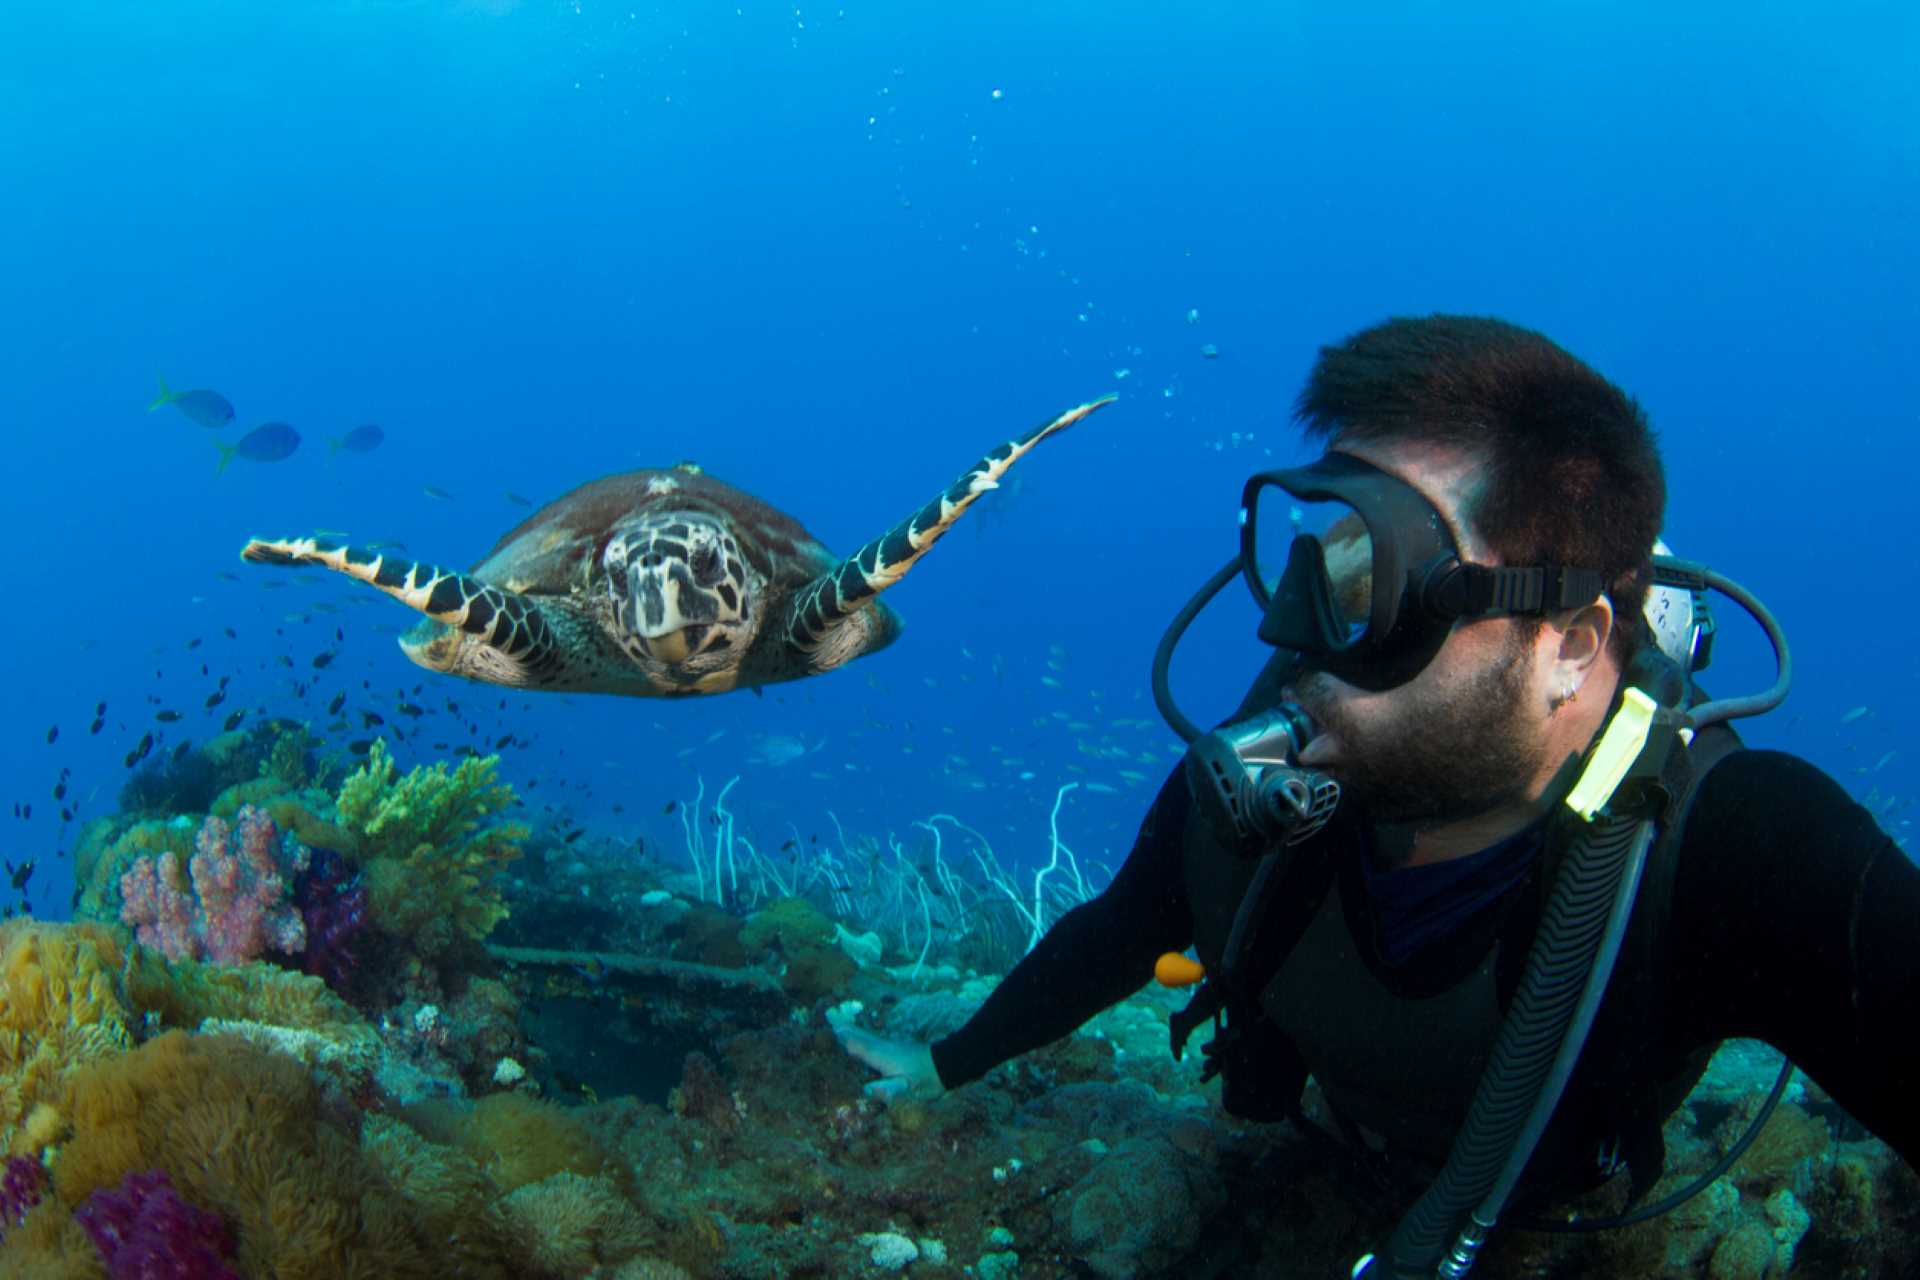 Scuba Diving Don'ts 3 - Don't Lie Or Miss Things Out